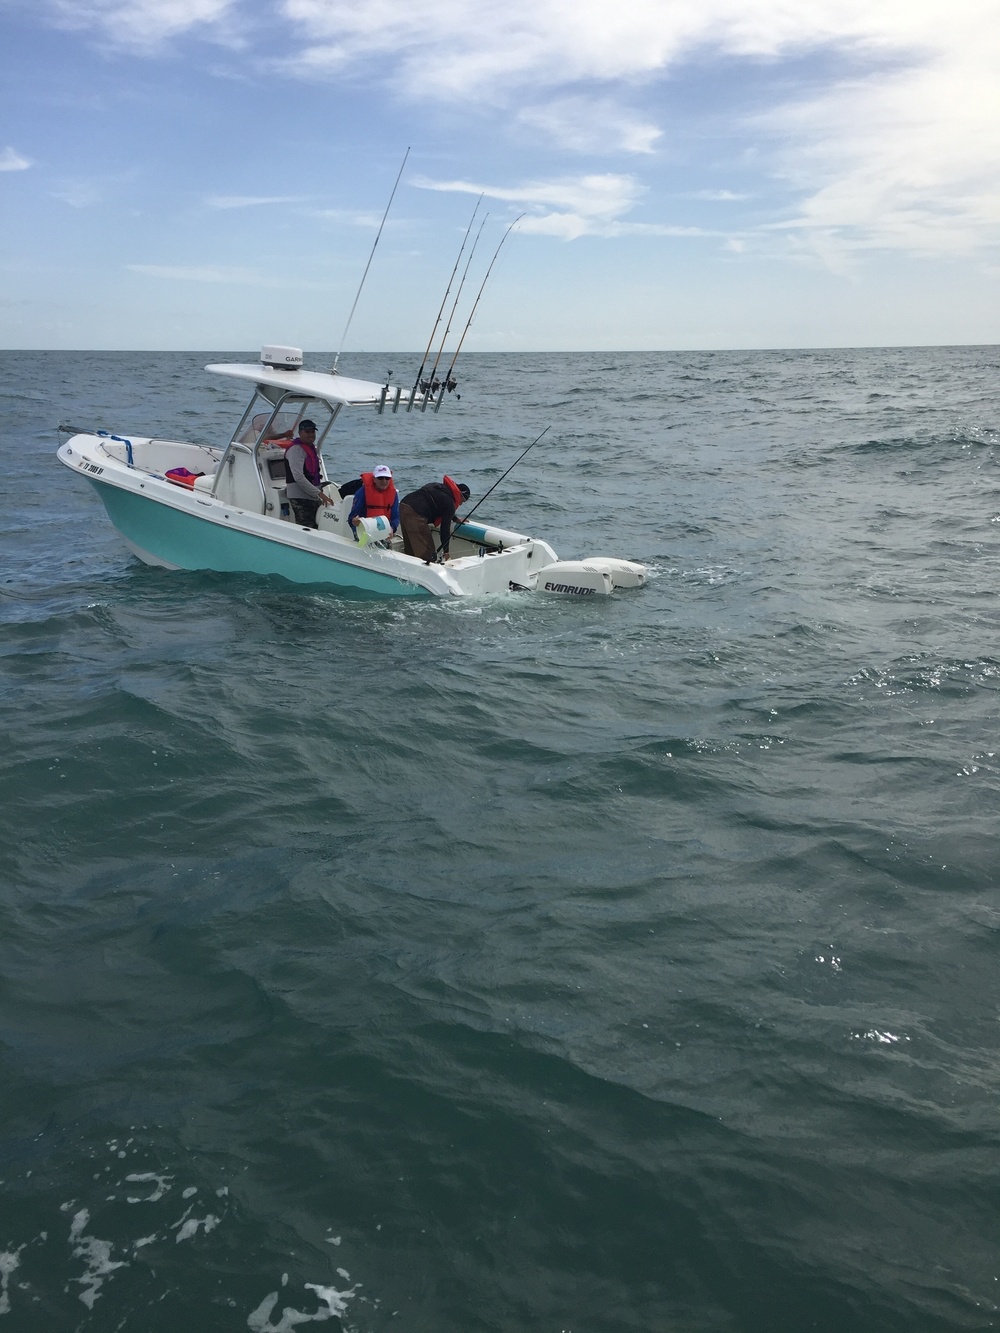 Coast Guard rescues 4 from capsizing vessel near Freeport, Texas